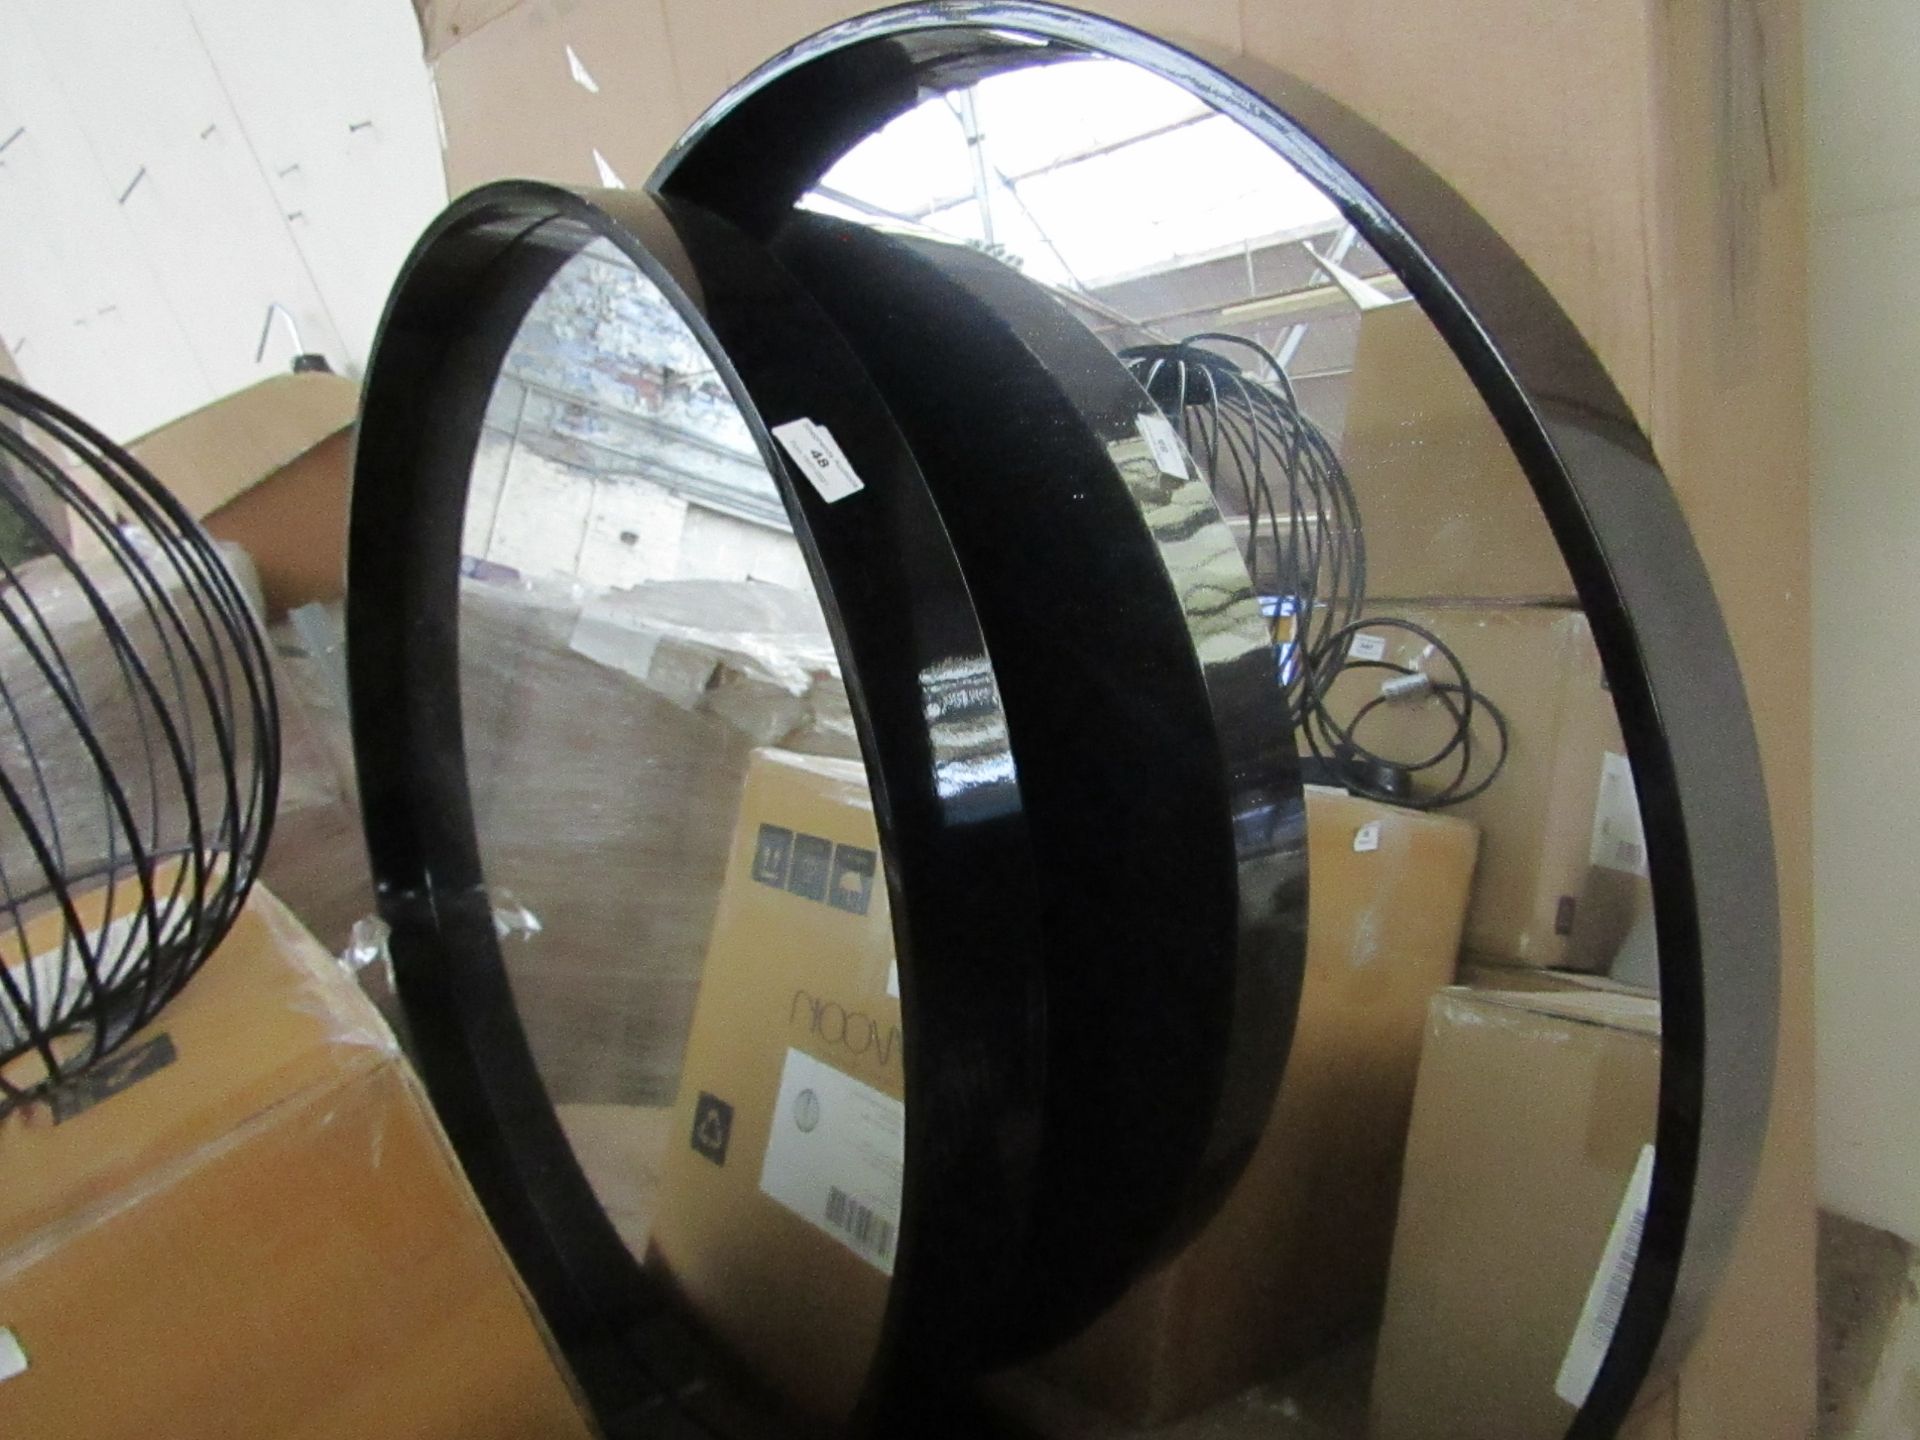 | 2X | MADE.COM BEX LARGE ROUND MIRROR 76CM | HAS MARKS AND SCRATCHES ON BOTH MIRRORS | RRP CIRCA £